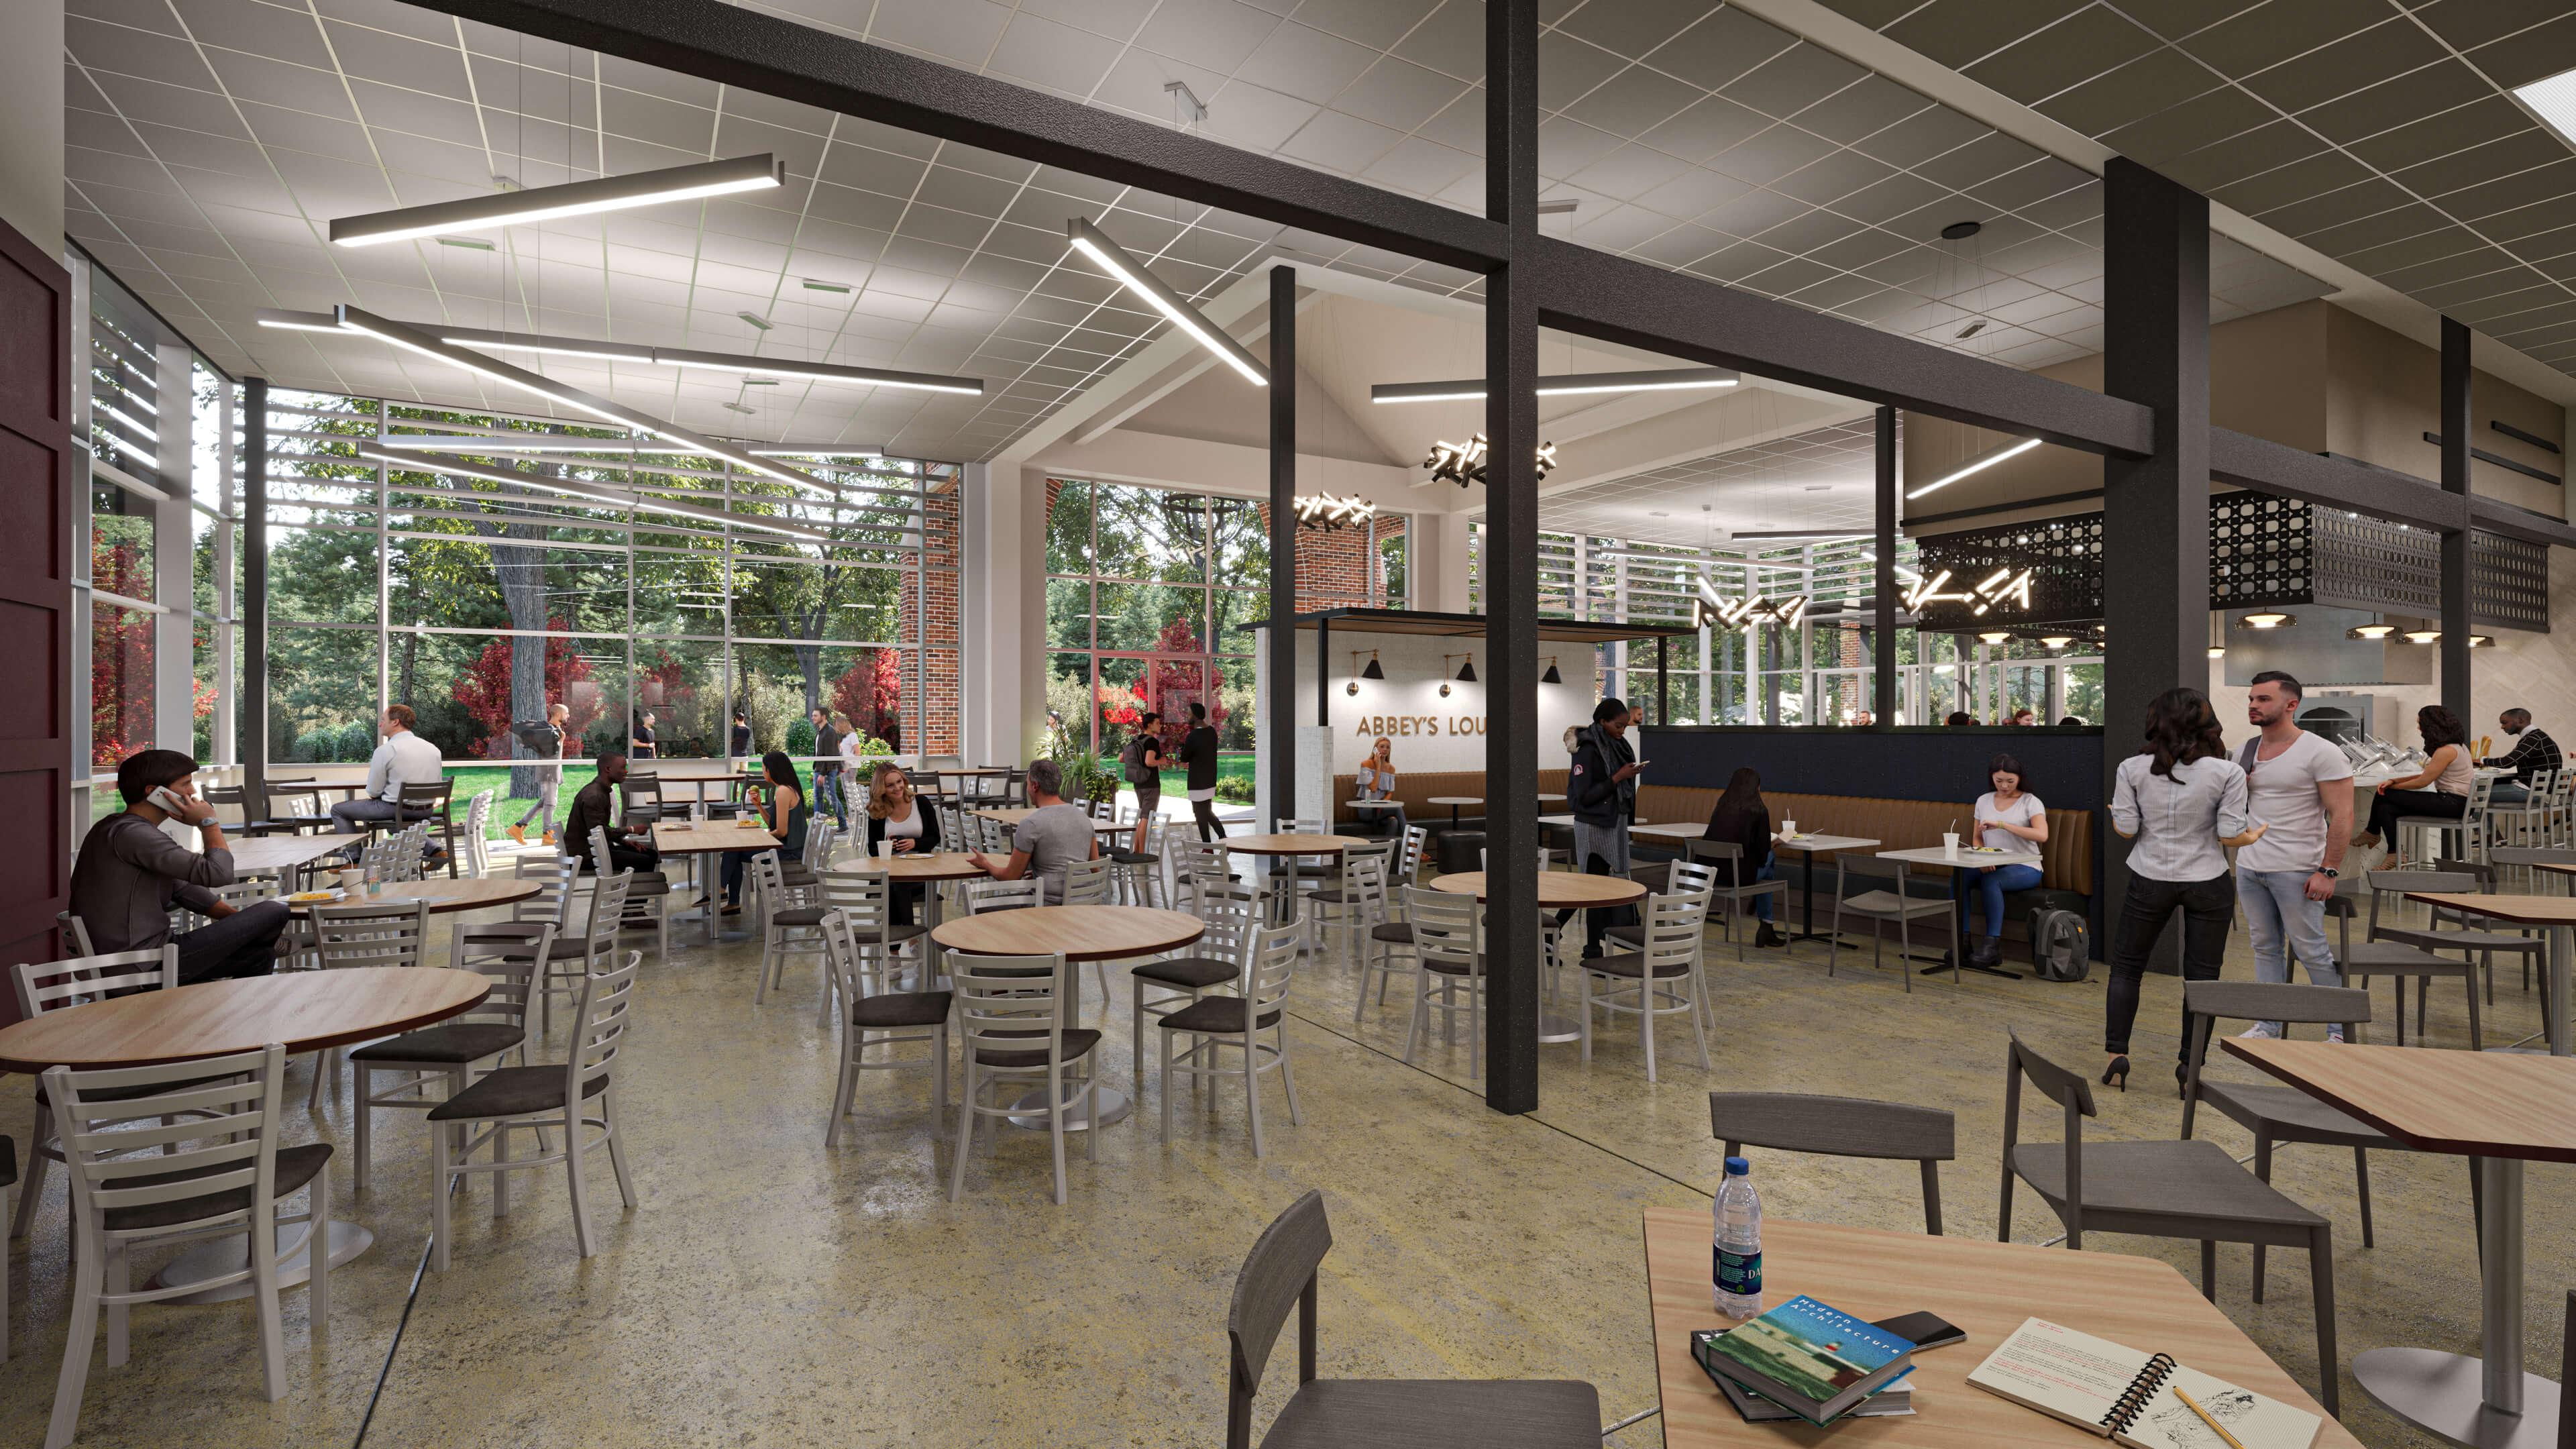 HE-0231 - BELMONT ABBEY COLLEGE_MAIN CAFE RENO-INT VIEW 06